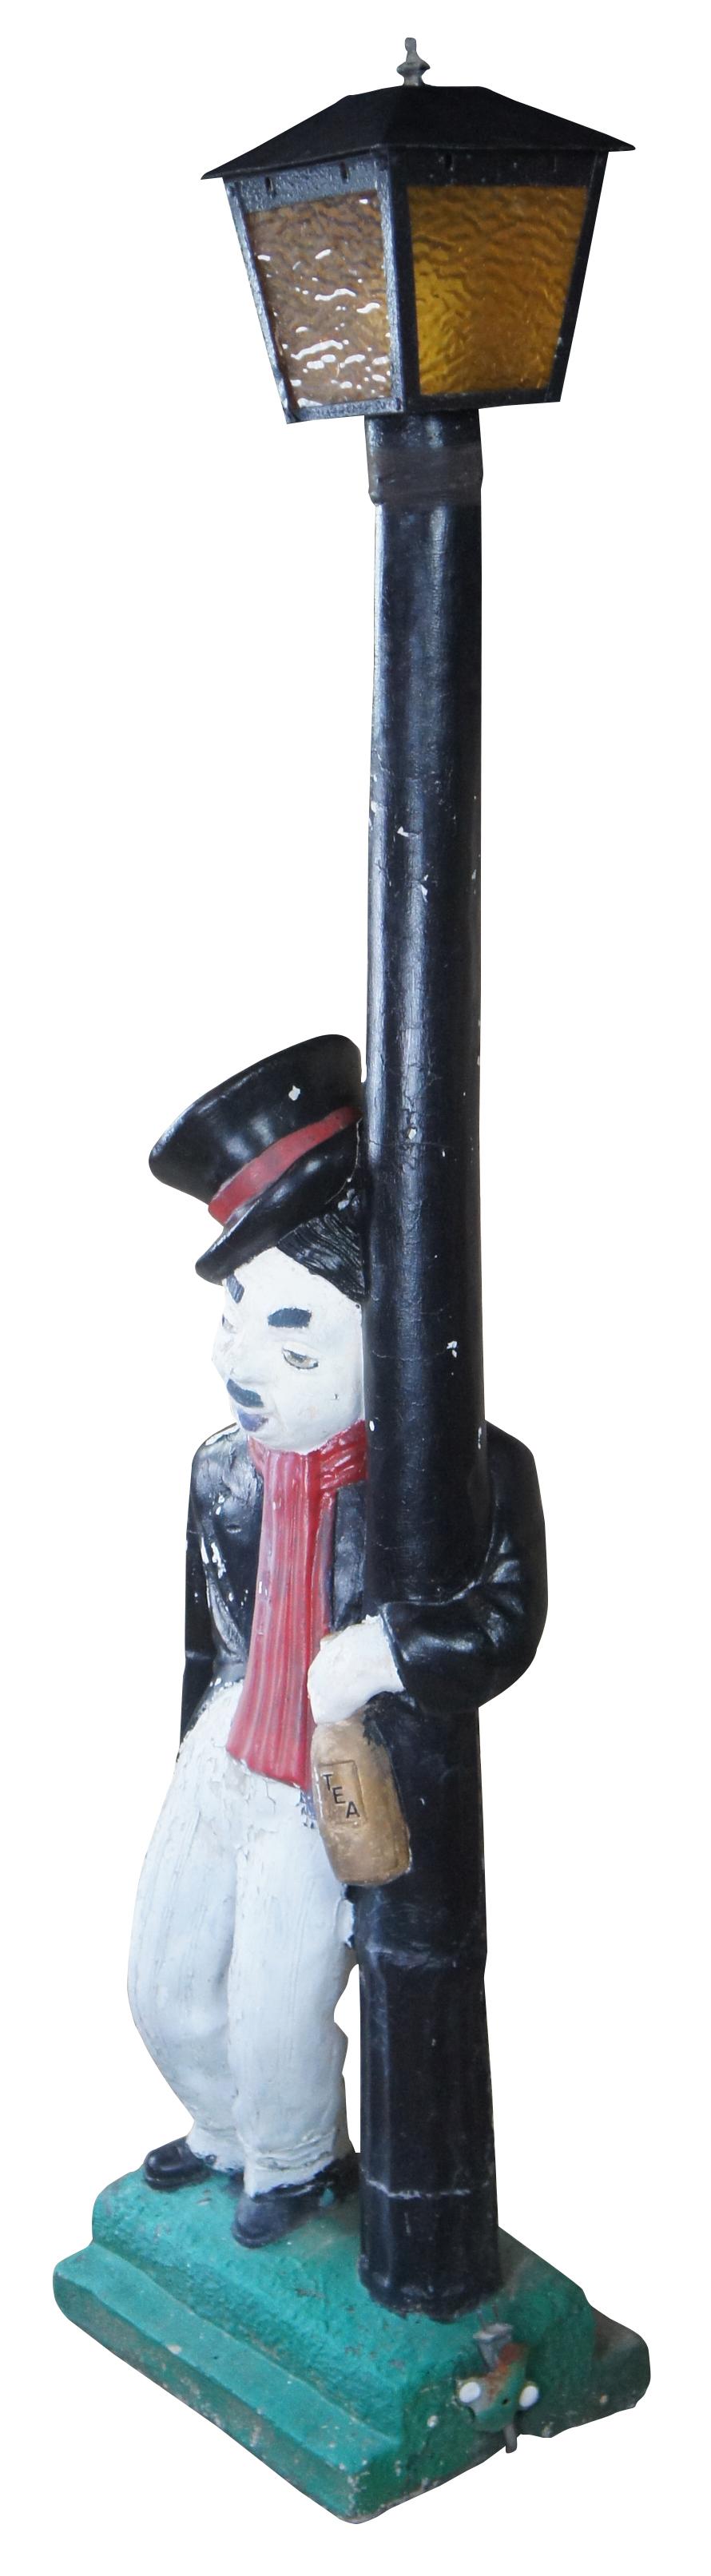 Mid 20th century Charlie Chaplin electrified concrete post light. Great for indoor or outdoor use. Features Charlie dressed in white and black with red scarf and top hat. He is leaning against a street light holding a bottle marked Tea. Wiring and